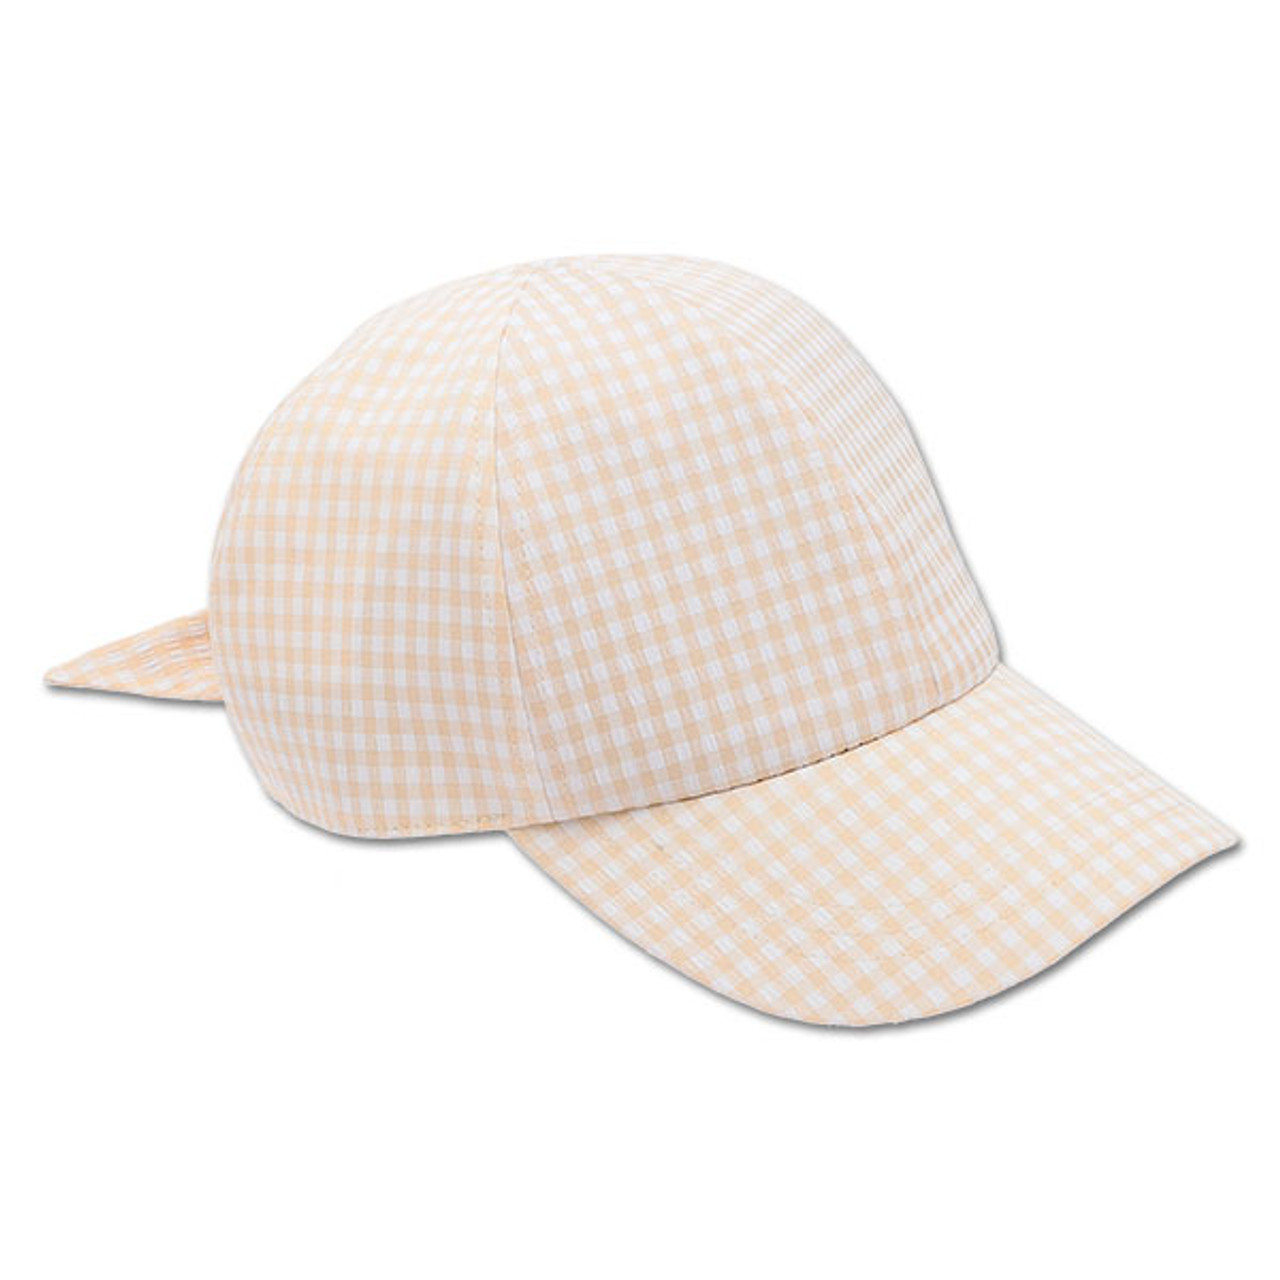 A beige and white gingham cap.